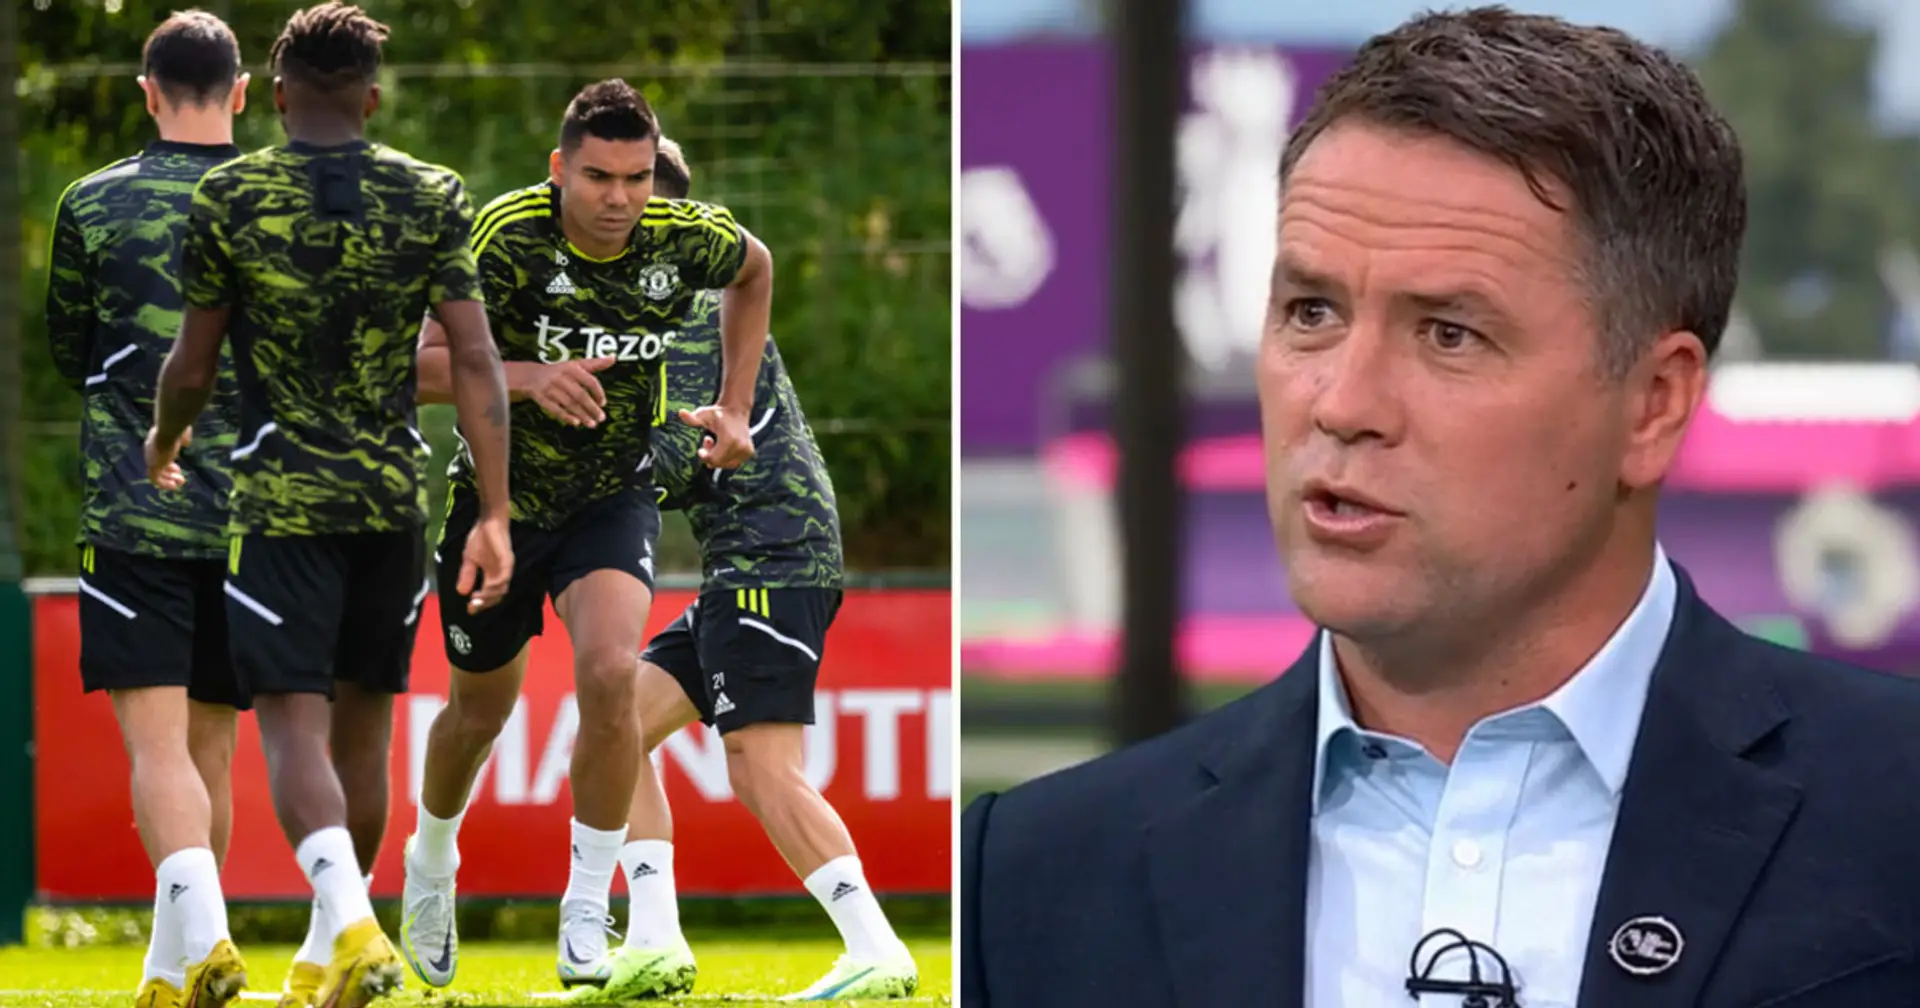 Michael Owen: Man United's new signings often look like they've never played football before